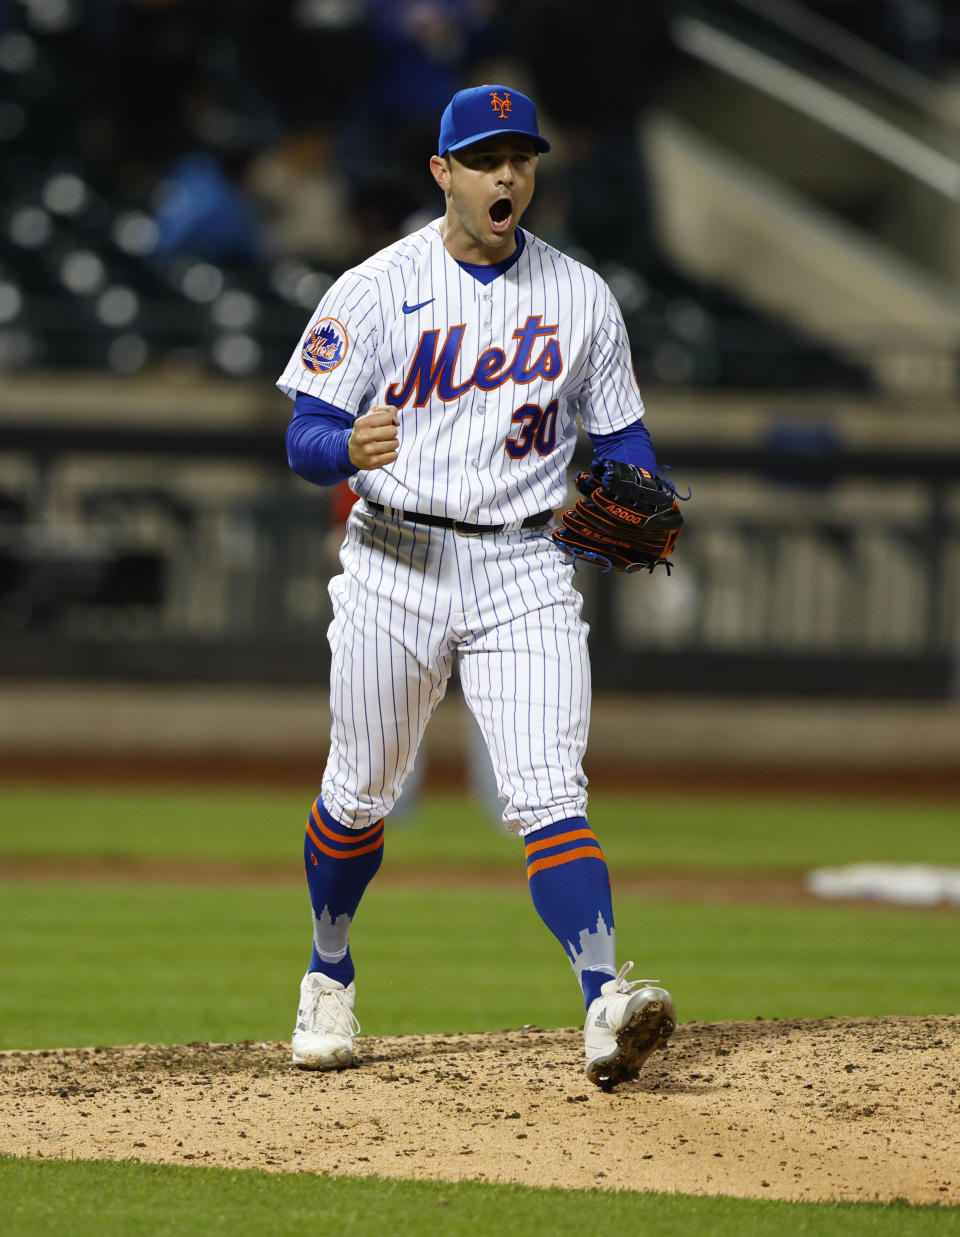 New York Mets relief pitcher David Robertson (30) reacts after the final out against the Washington Nationals during the ninth inning of a baseball game, Thursday, April 27, 2023, in New York. The New York Mets won 9-8. (AP Photo/Noah K. Murray)